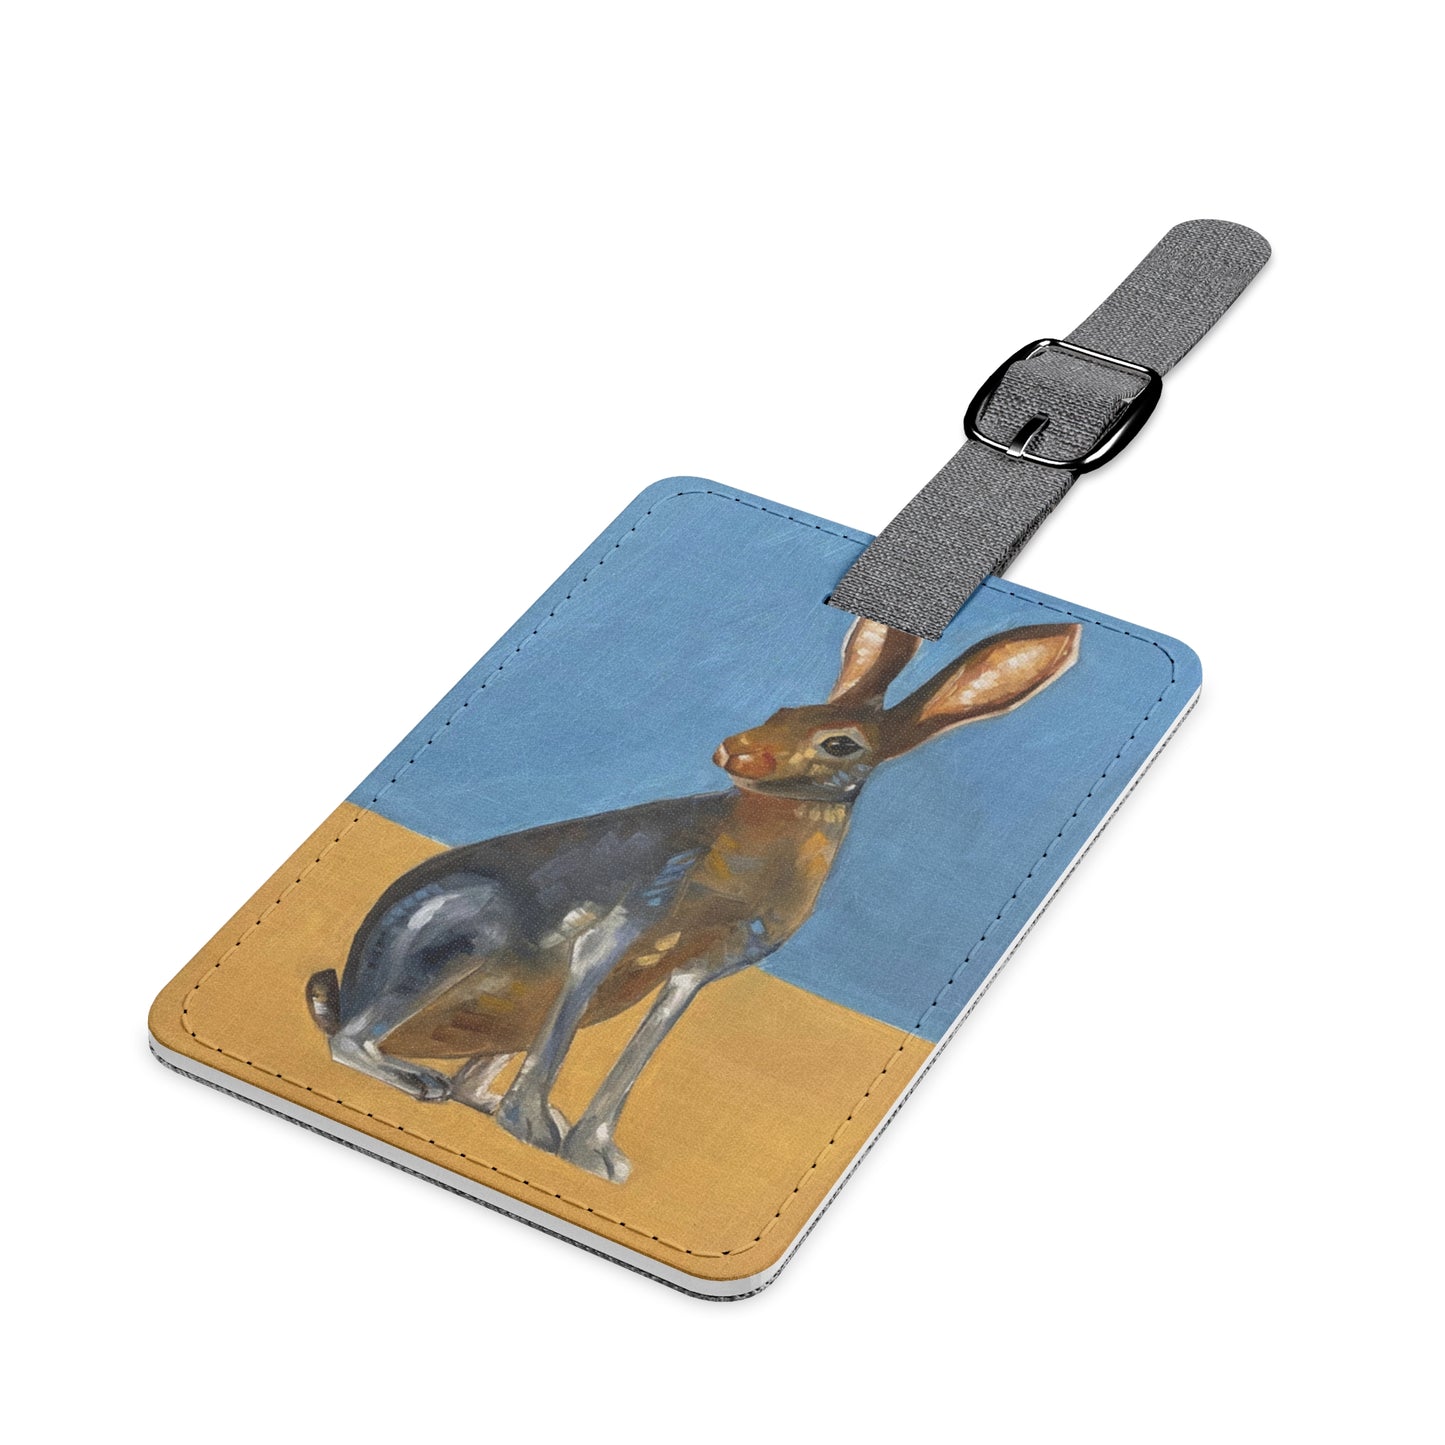 Bunny Saffiano Polyester Luggage Tag, Rectangle